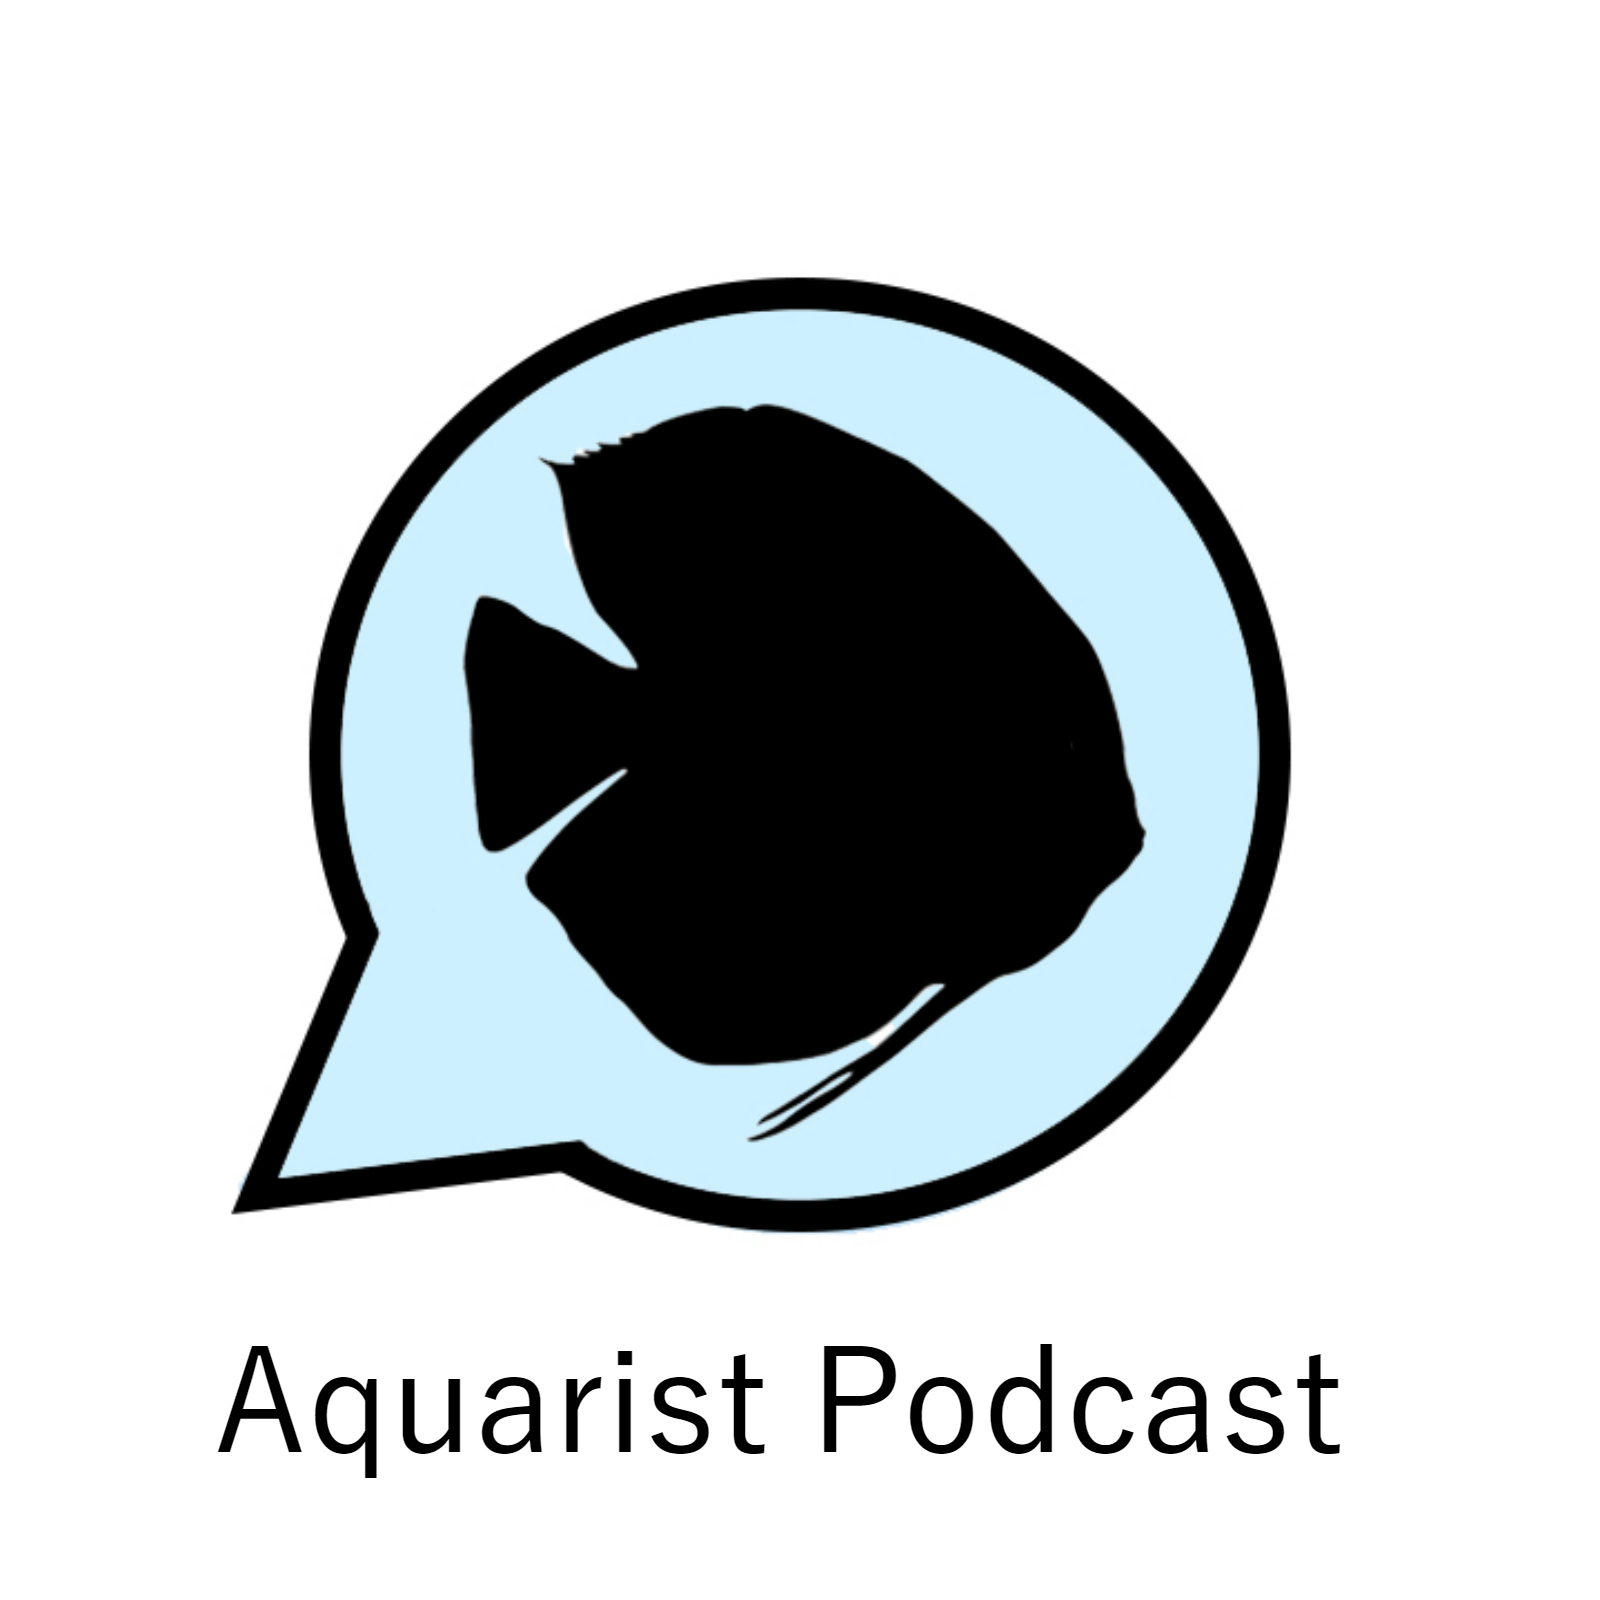 Ep. 21 - Matthew Grant of Printed Reefing Solutions on 3D printing aquarium filters and accessories